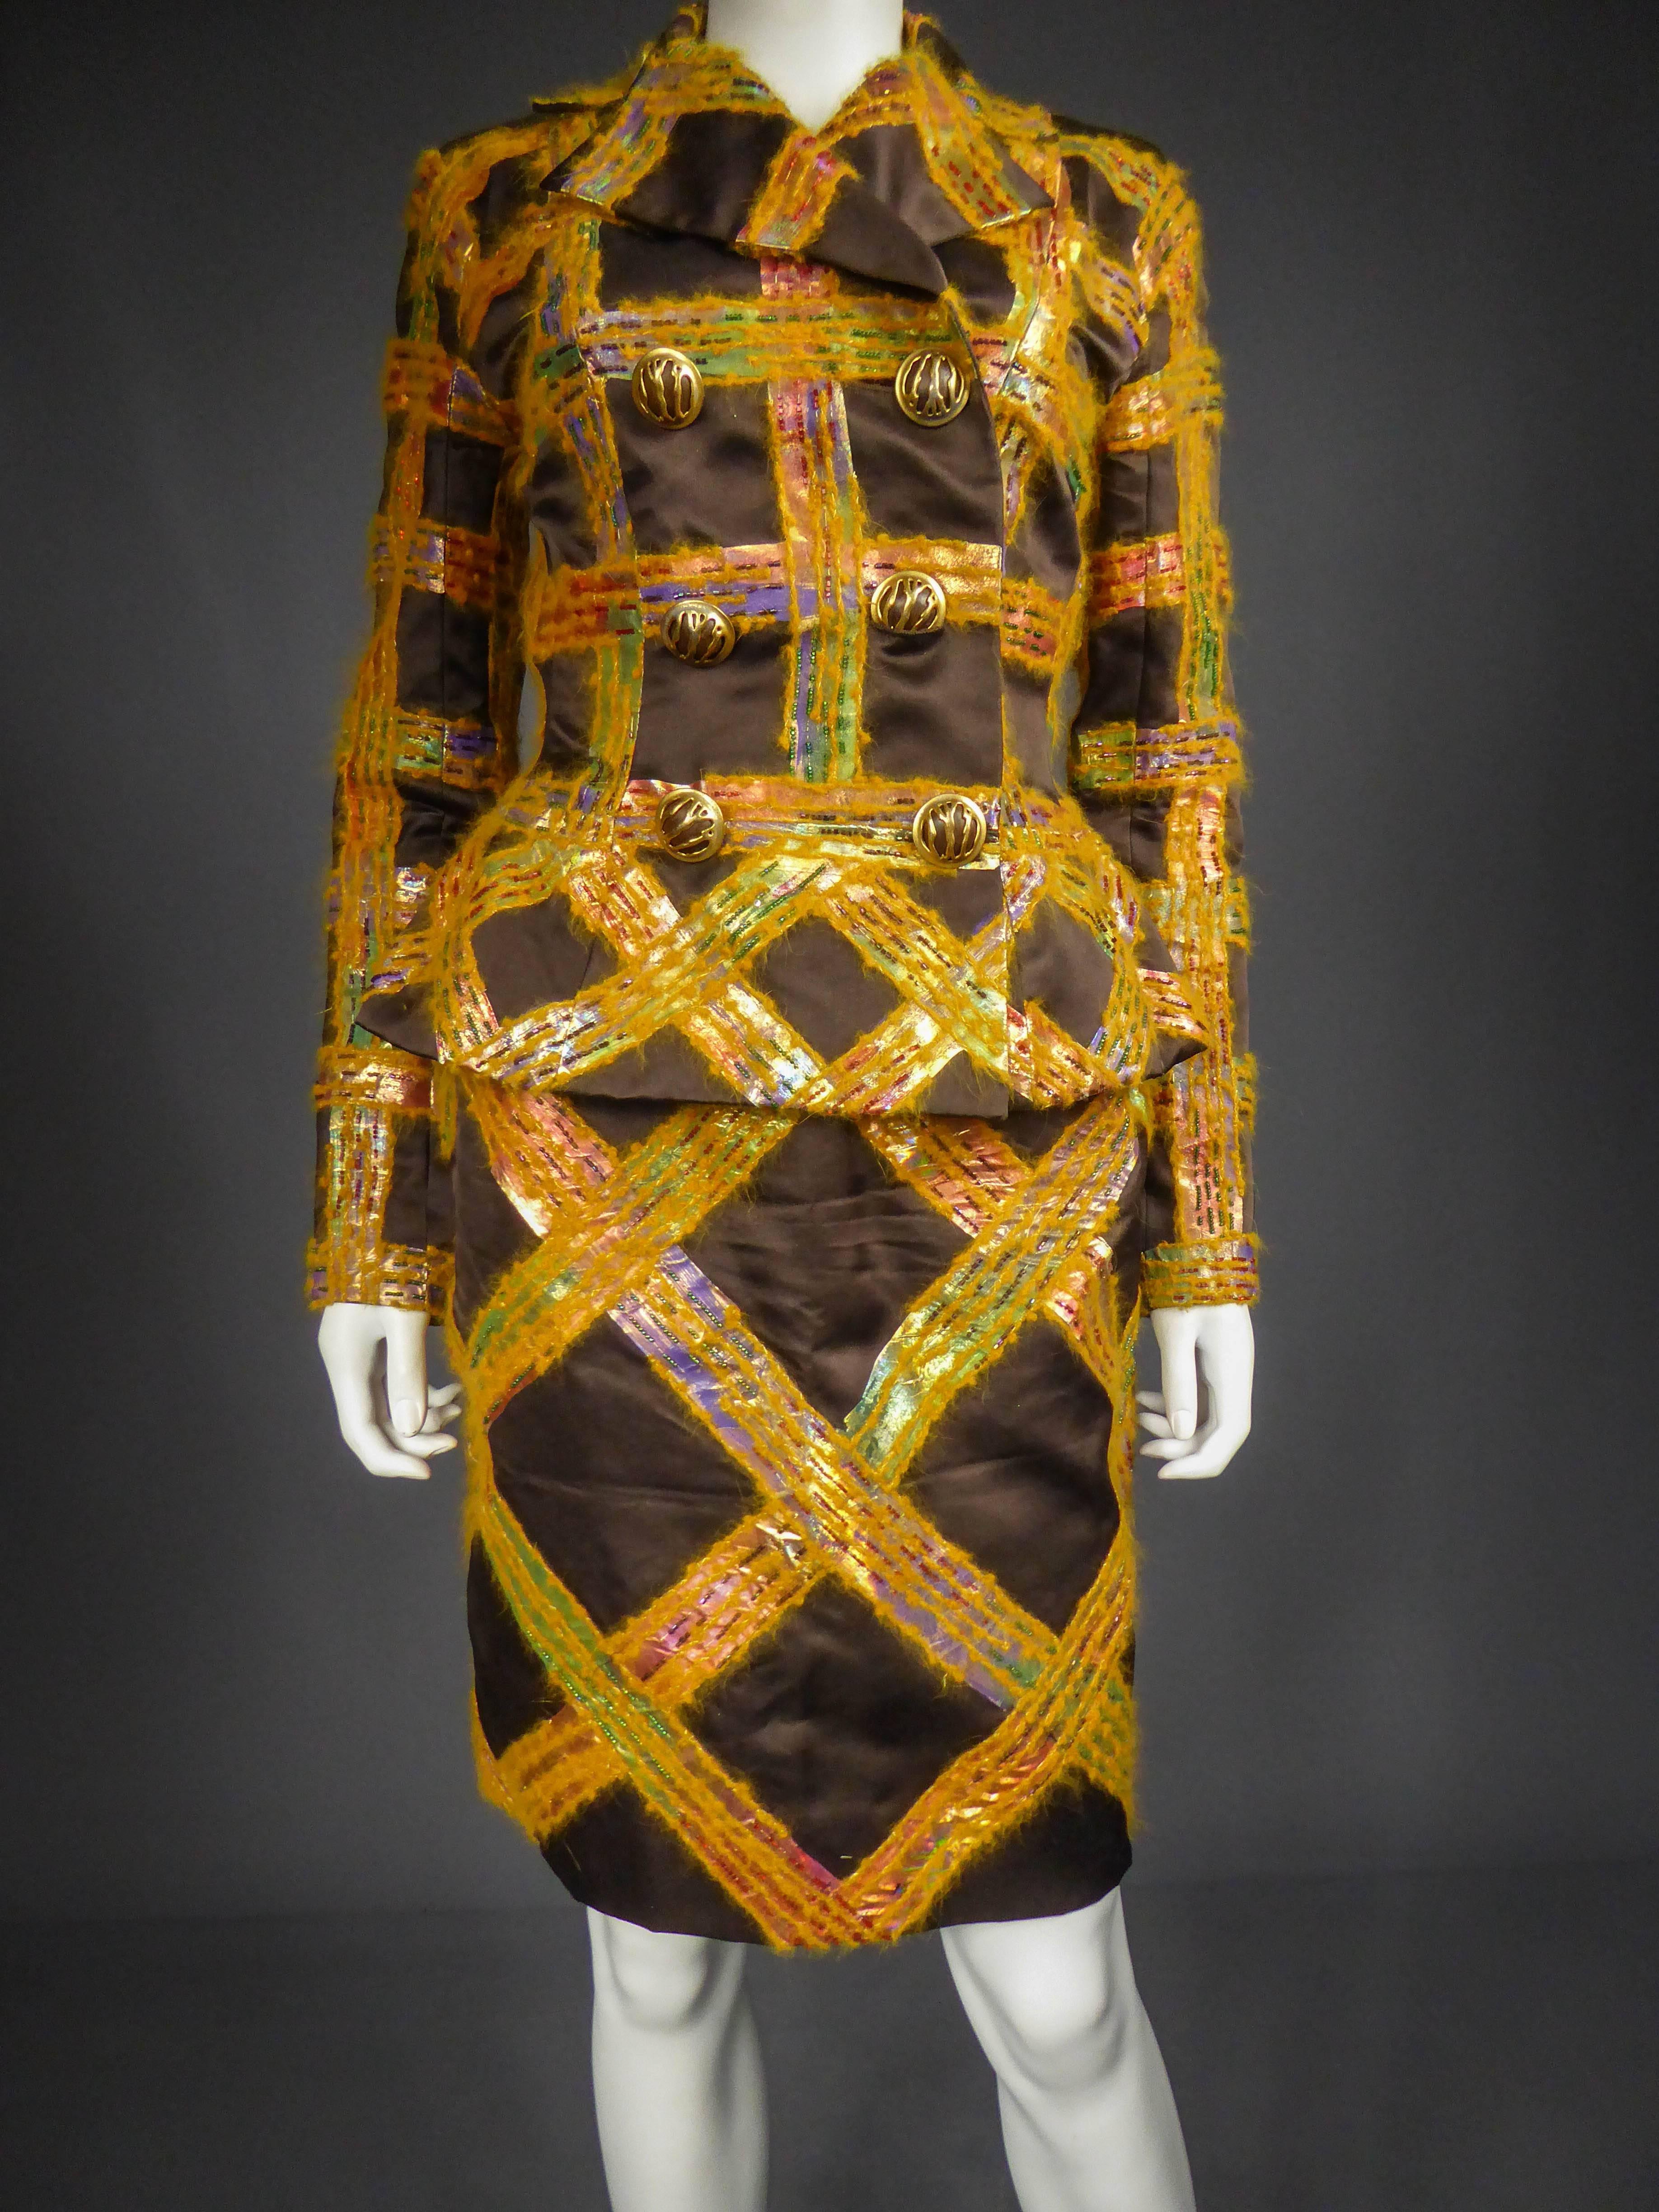 Circa 1990

France

Gorgeous skirt suit Ted Lapidus by Olivier Lapidus of the 90s. Clever shaped chocolate silk satin entirely embroidered with a check pattern in orange angora and iridescent plastic, embroidered with multicolored pearls. Jacket